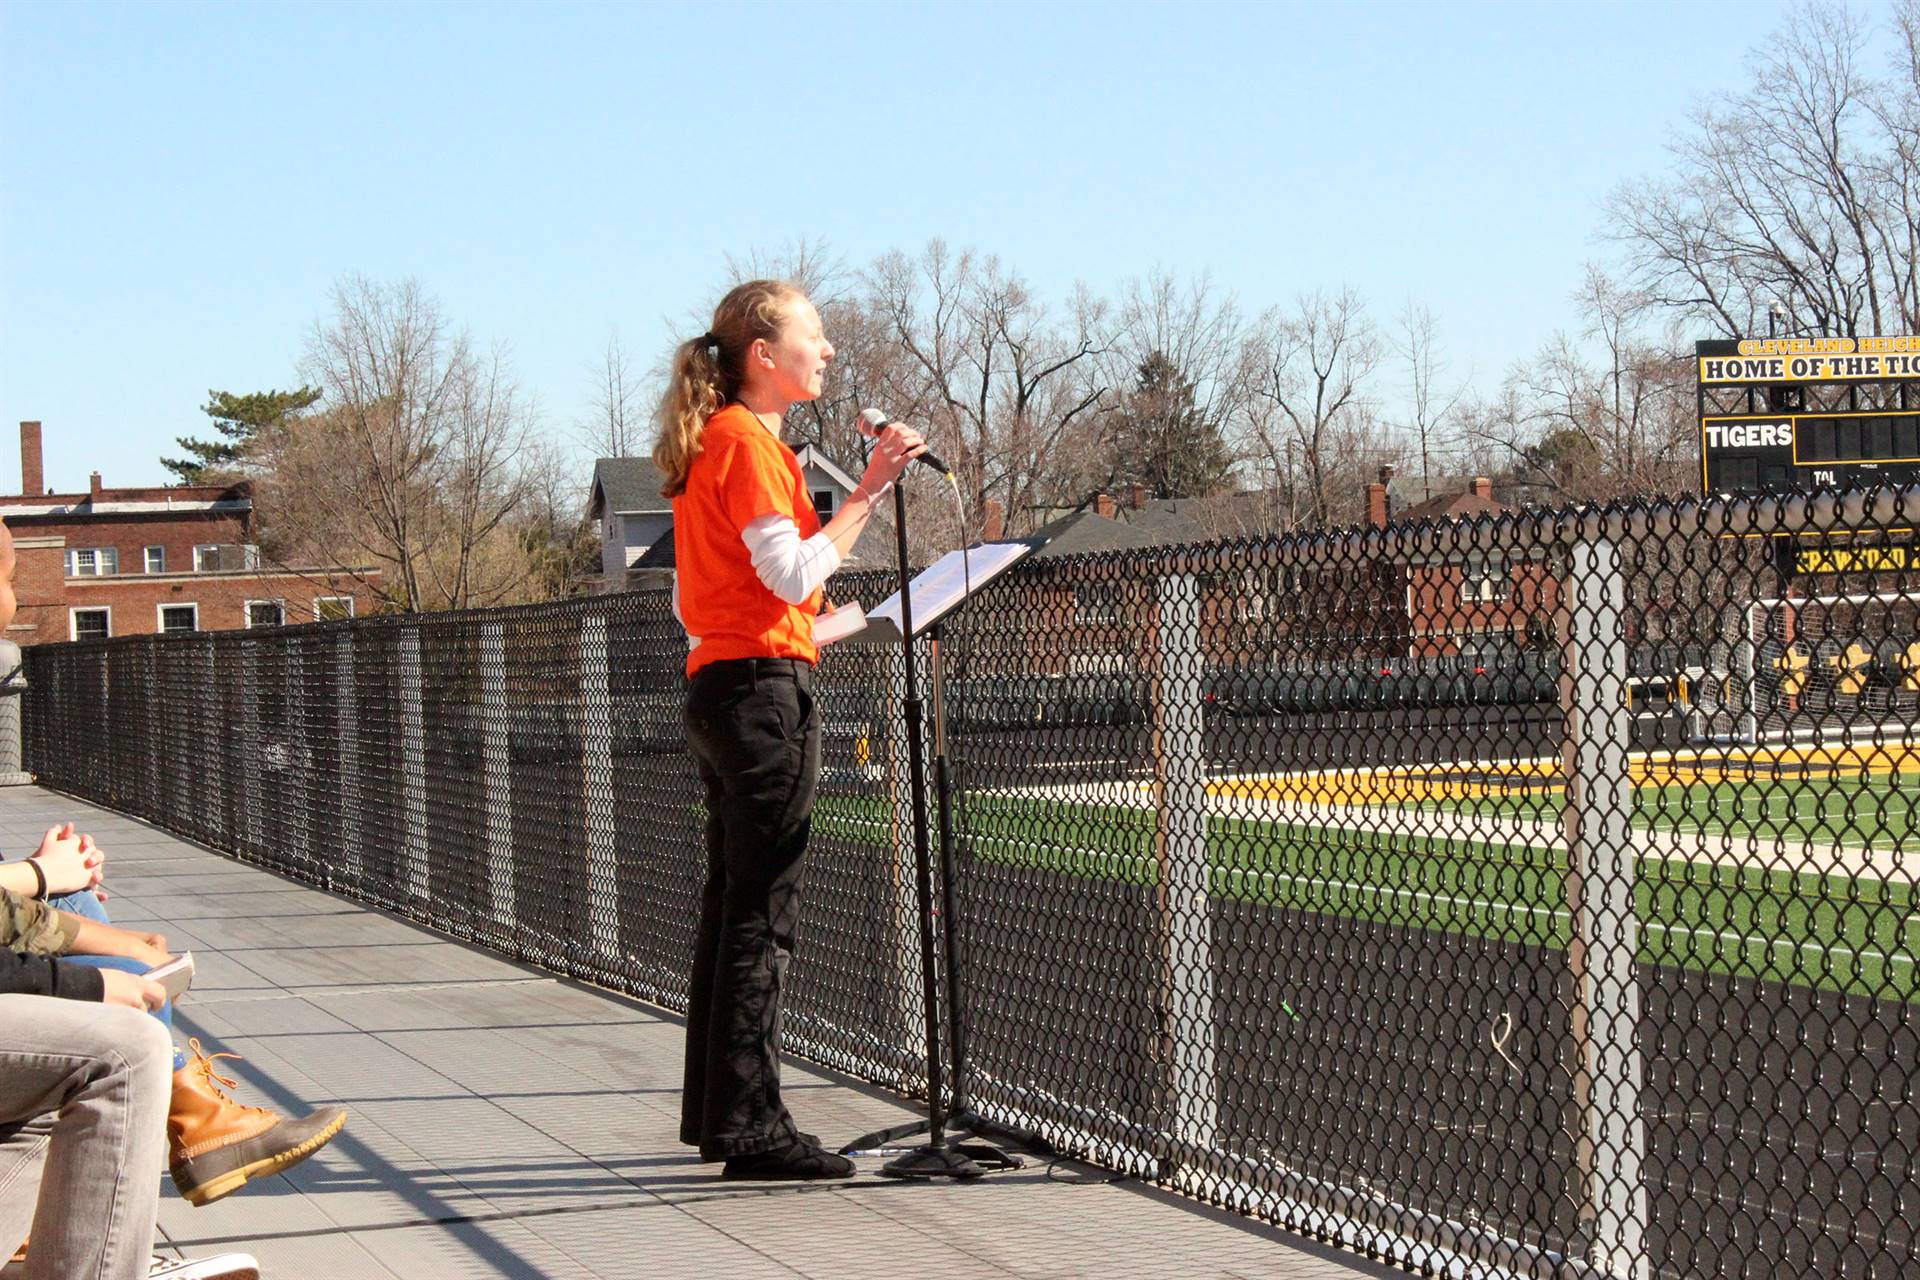 Maple Buescher speaks at the Heights High rally